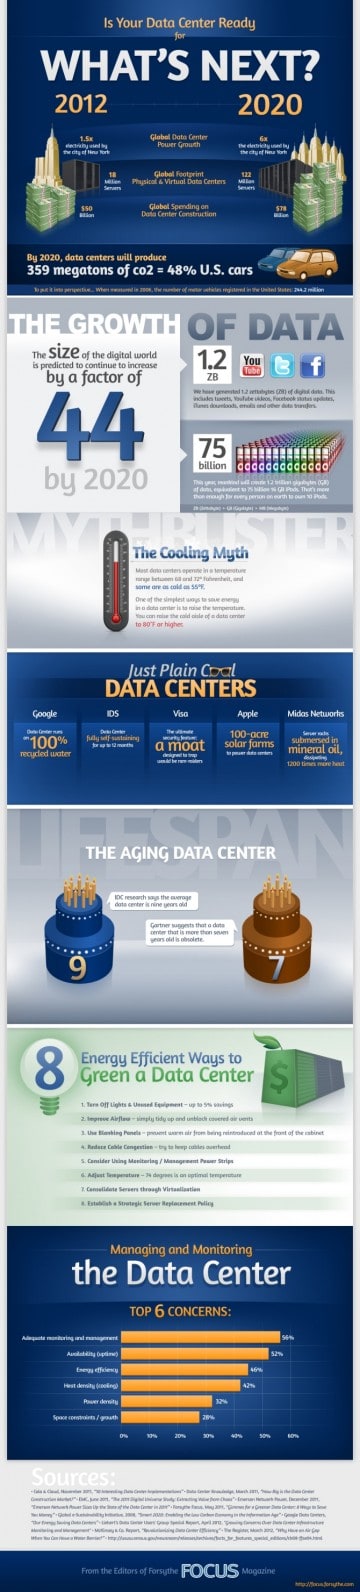 Infographic: Is Your Data Centre Ready For What'S Next?